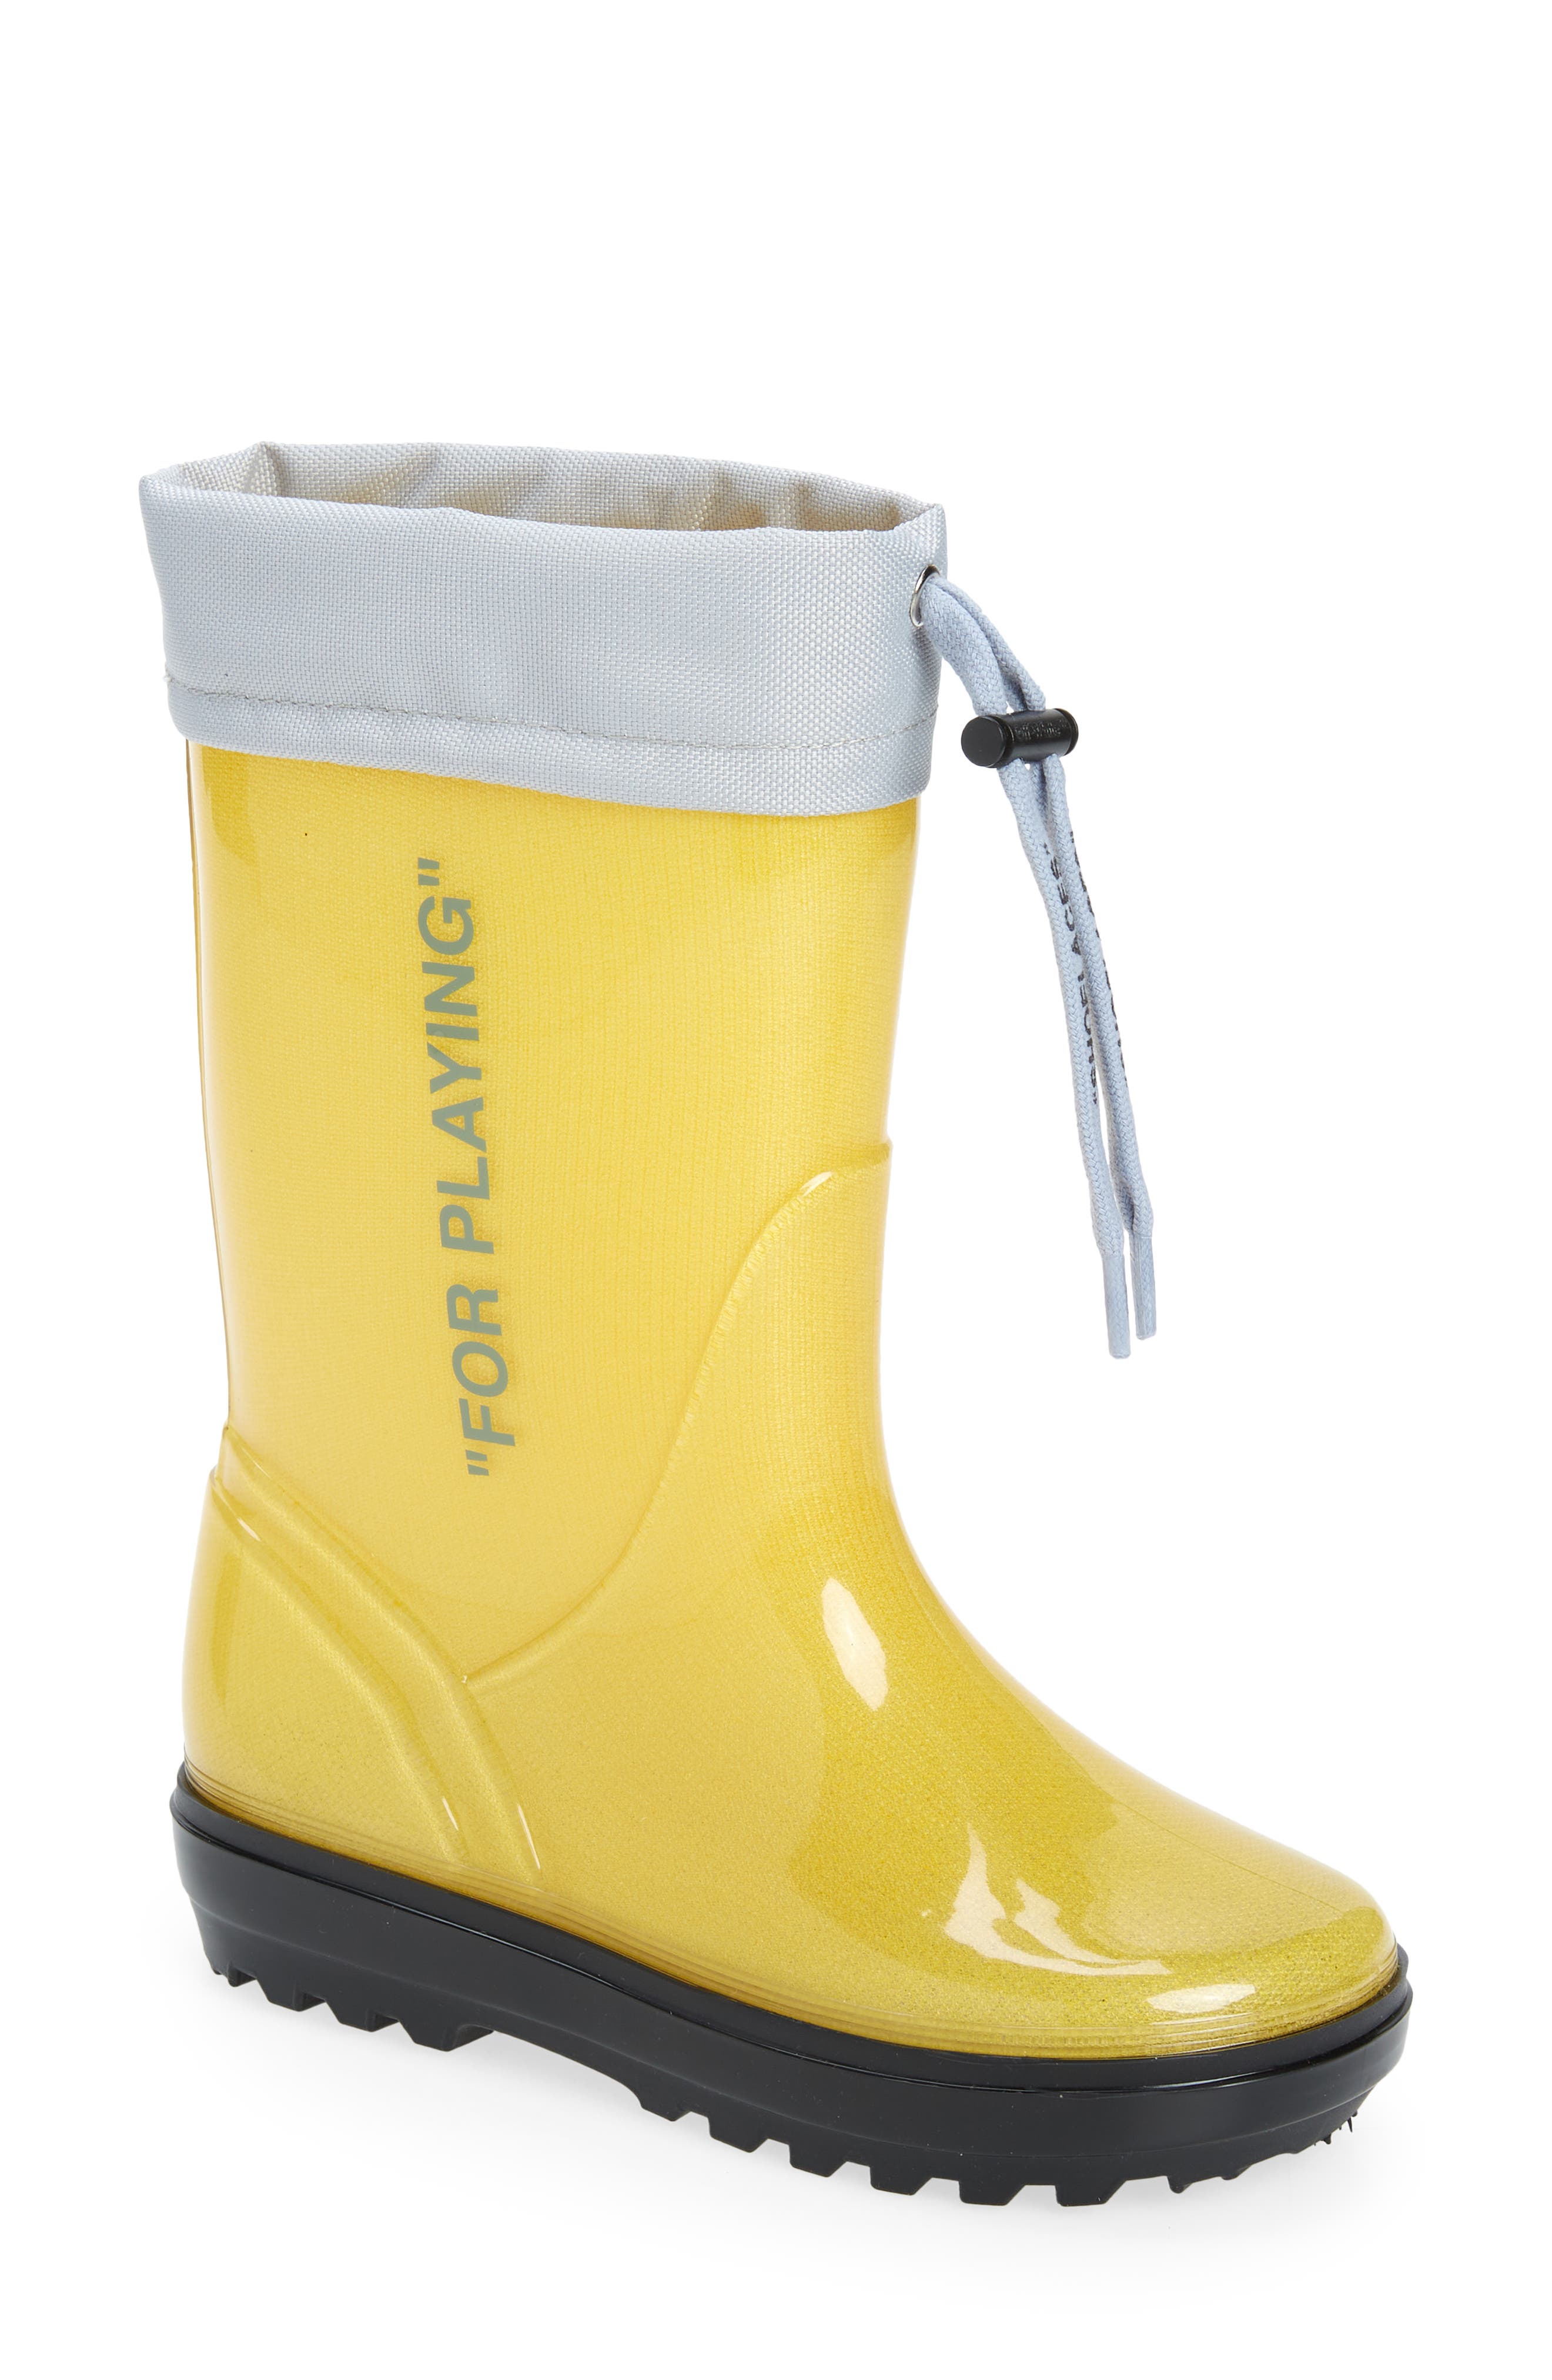 Off-White Rubber Rain Boot in Yellow/Grey